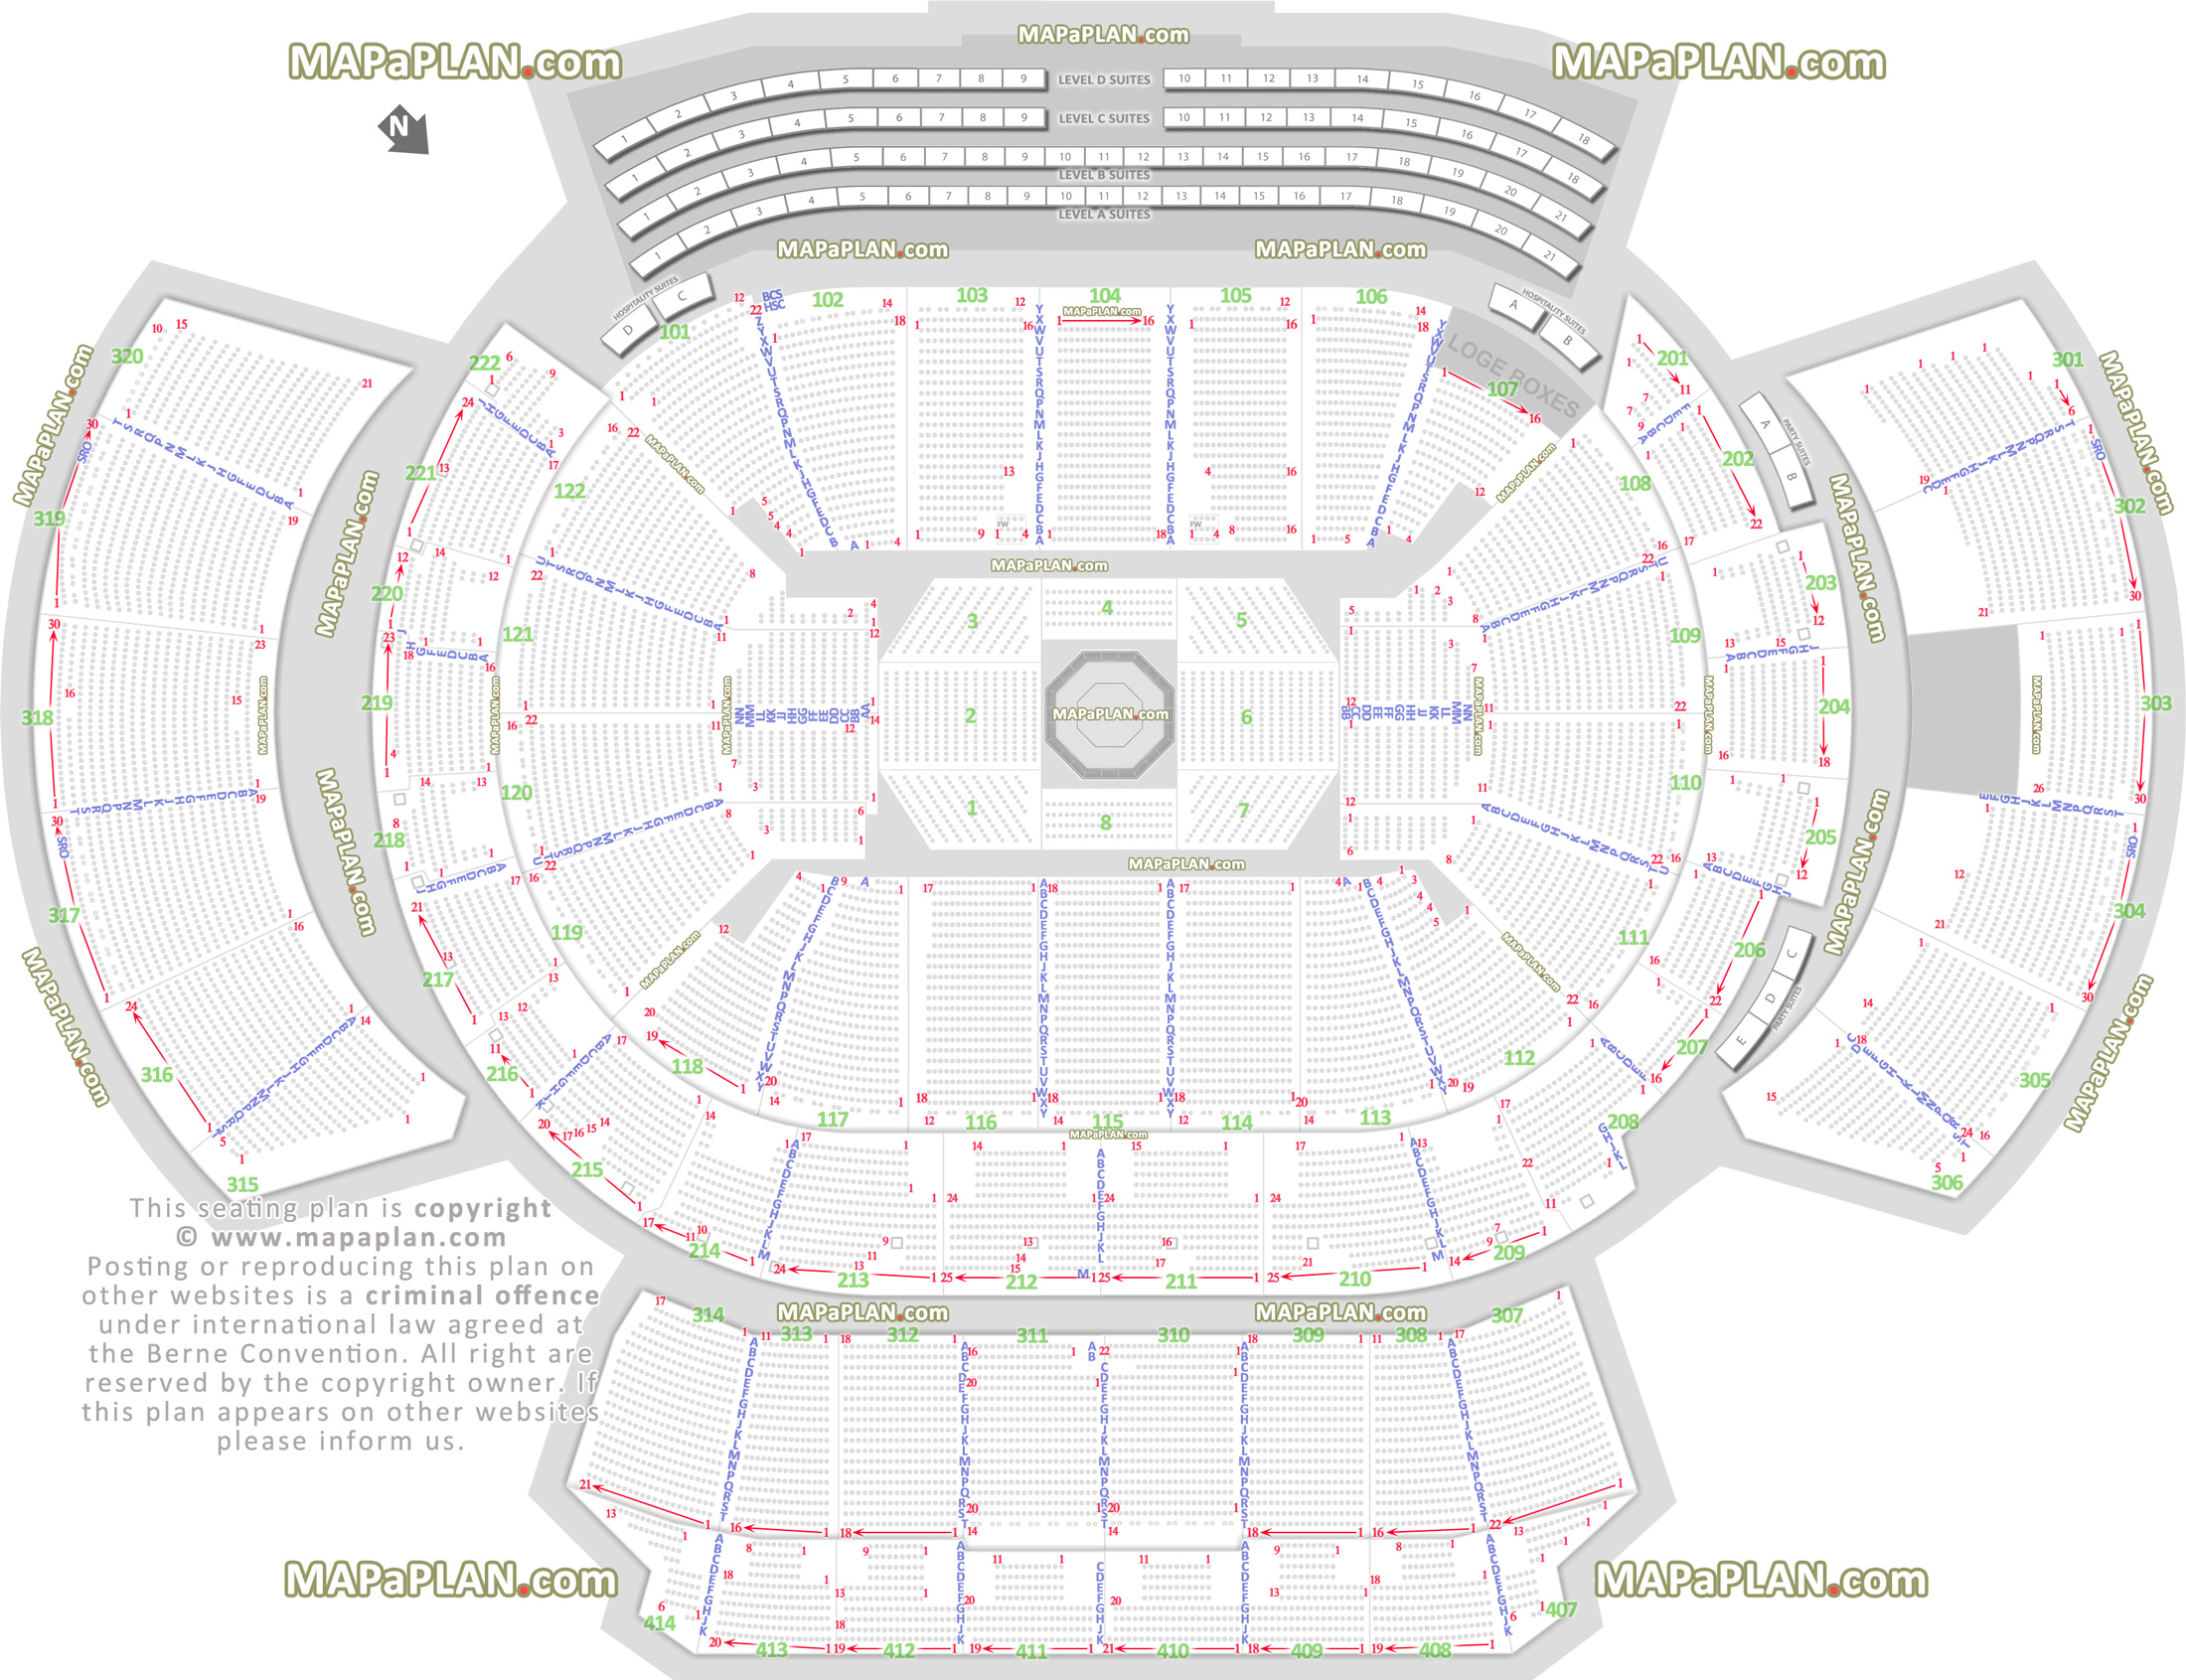 ufc mma fights fully seated setup chart viewer printable bowl seat numbering premium luxury executive vip suites State Farm Arena center stadium information guide Atlanta State Farm Arena seating chart